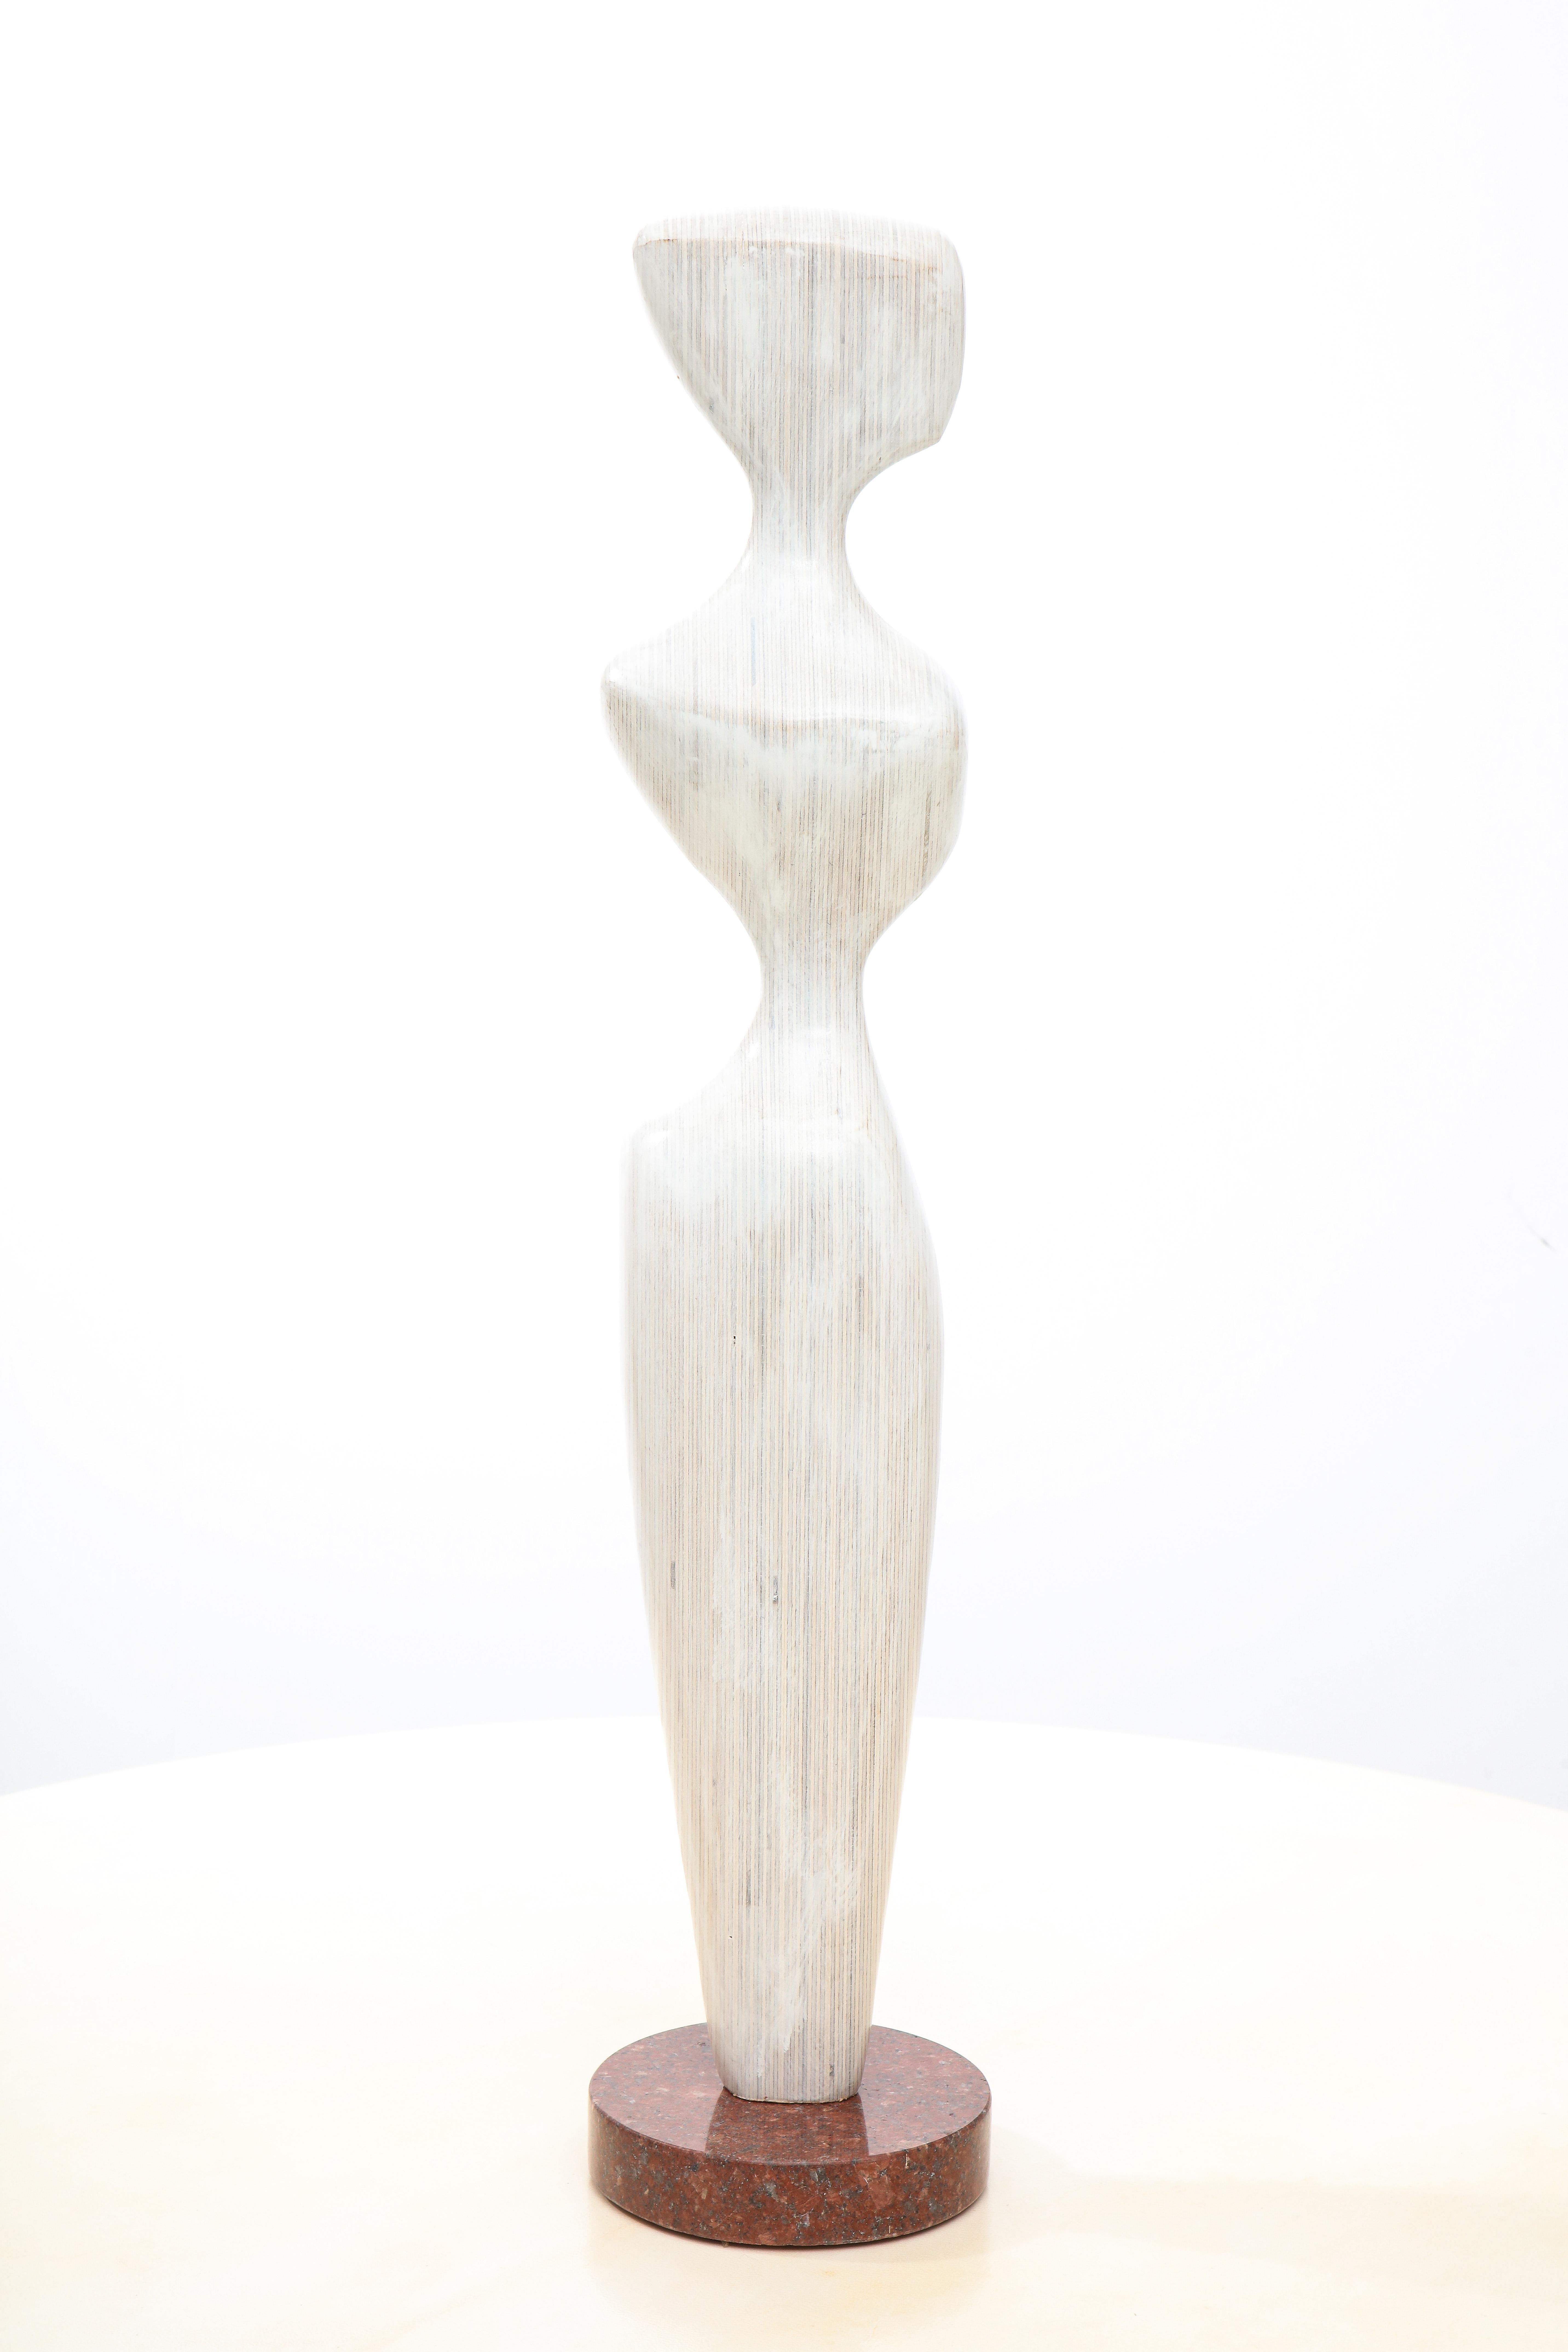 'Figure Study III'
by Dick Shanley
Medium: Laminated birch wood, mounted on a round granite base.
Signed: DS
Size: 25